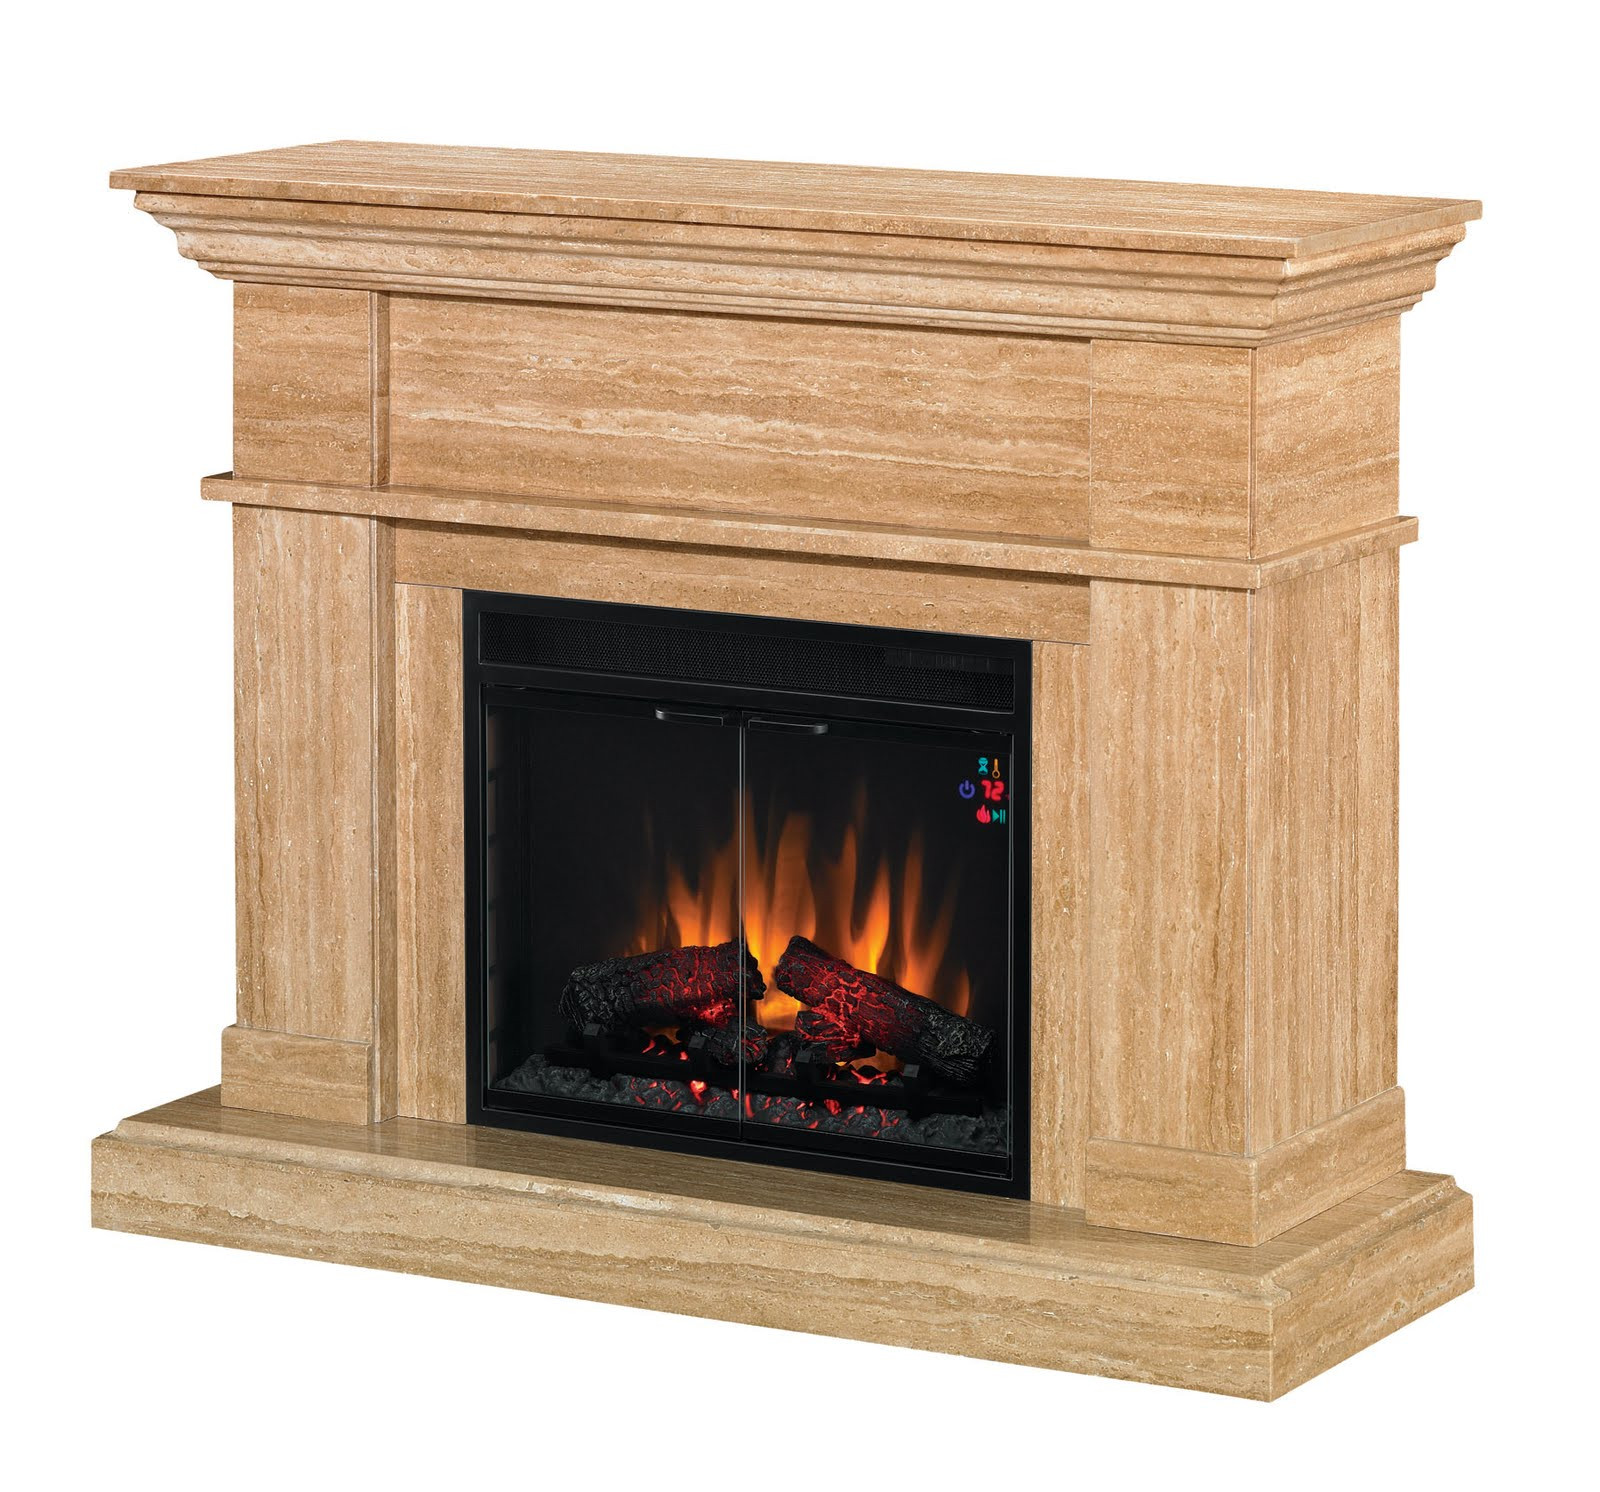 Twinstar Electric Fireplace
 Twin Star International Electric Fireplaces At the